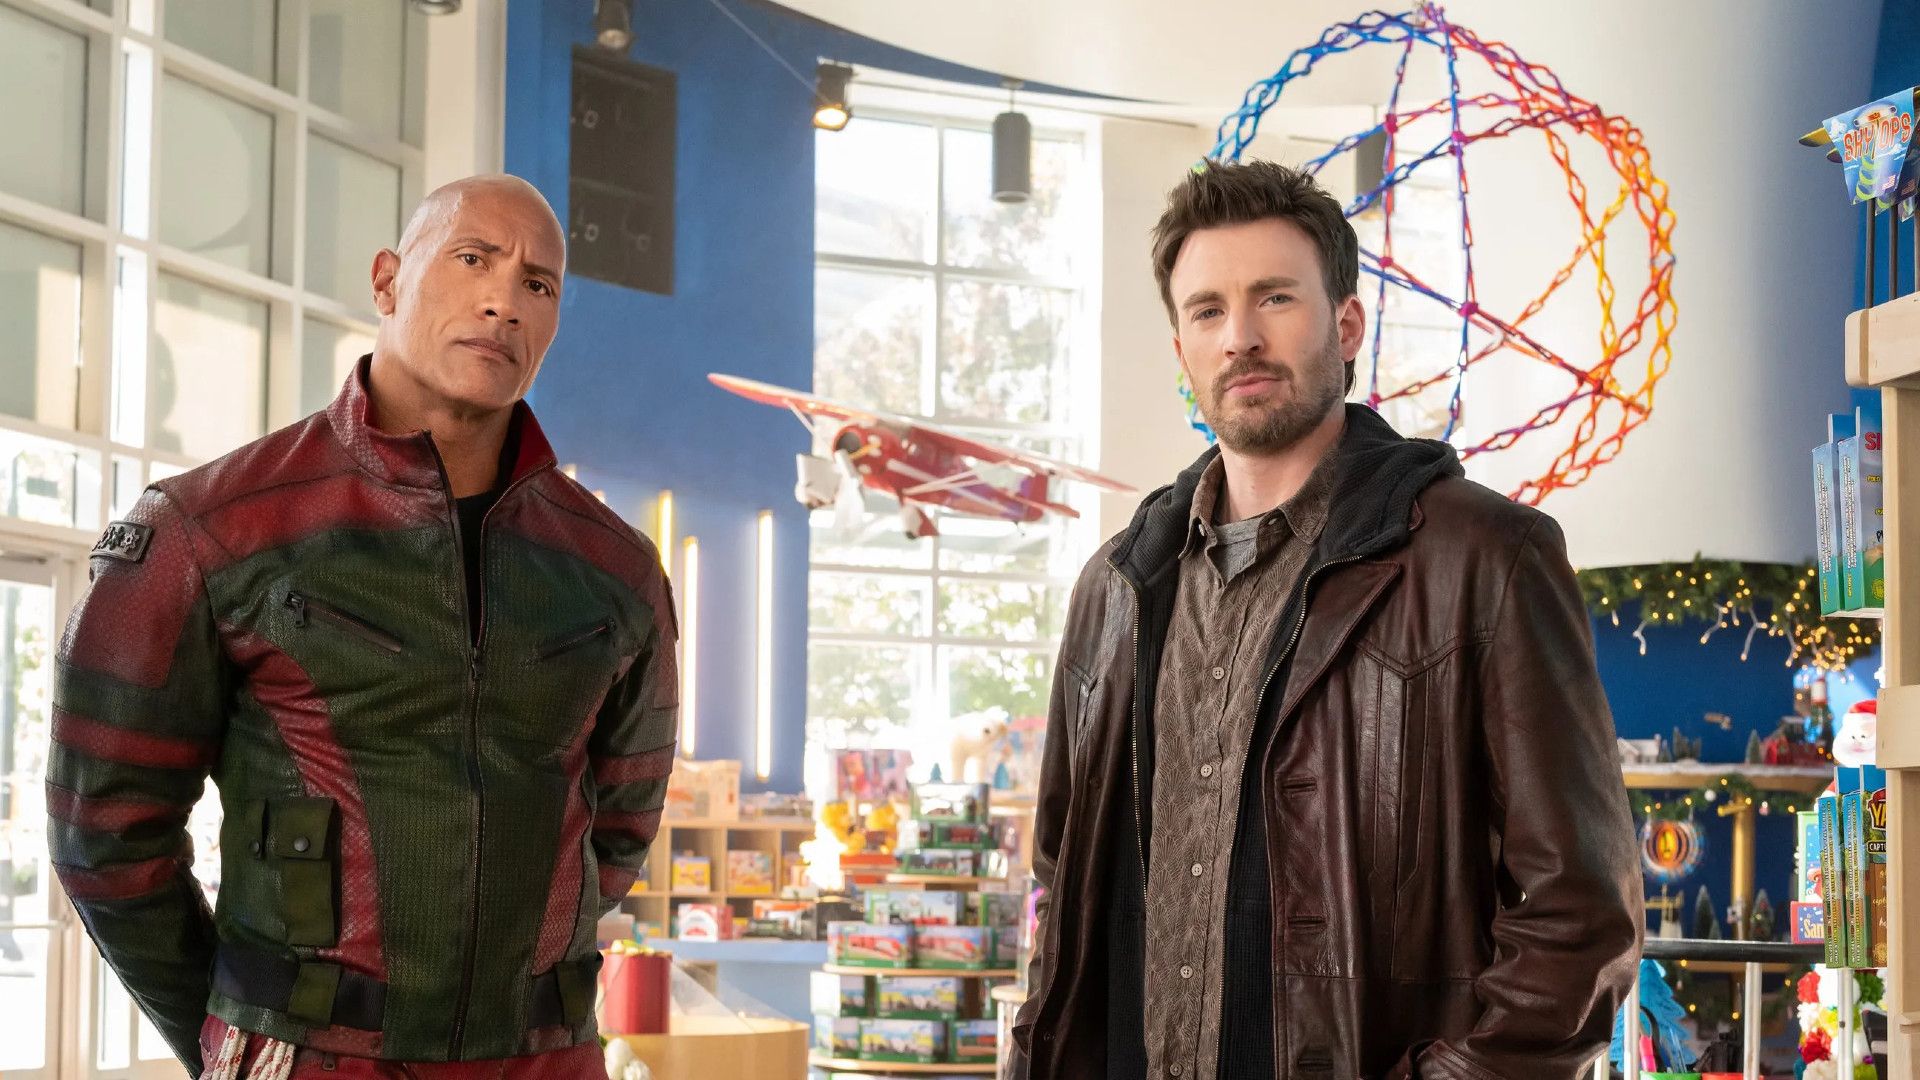 Dwayne Johnson and Chris Evans stand together in Red One